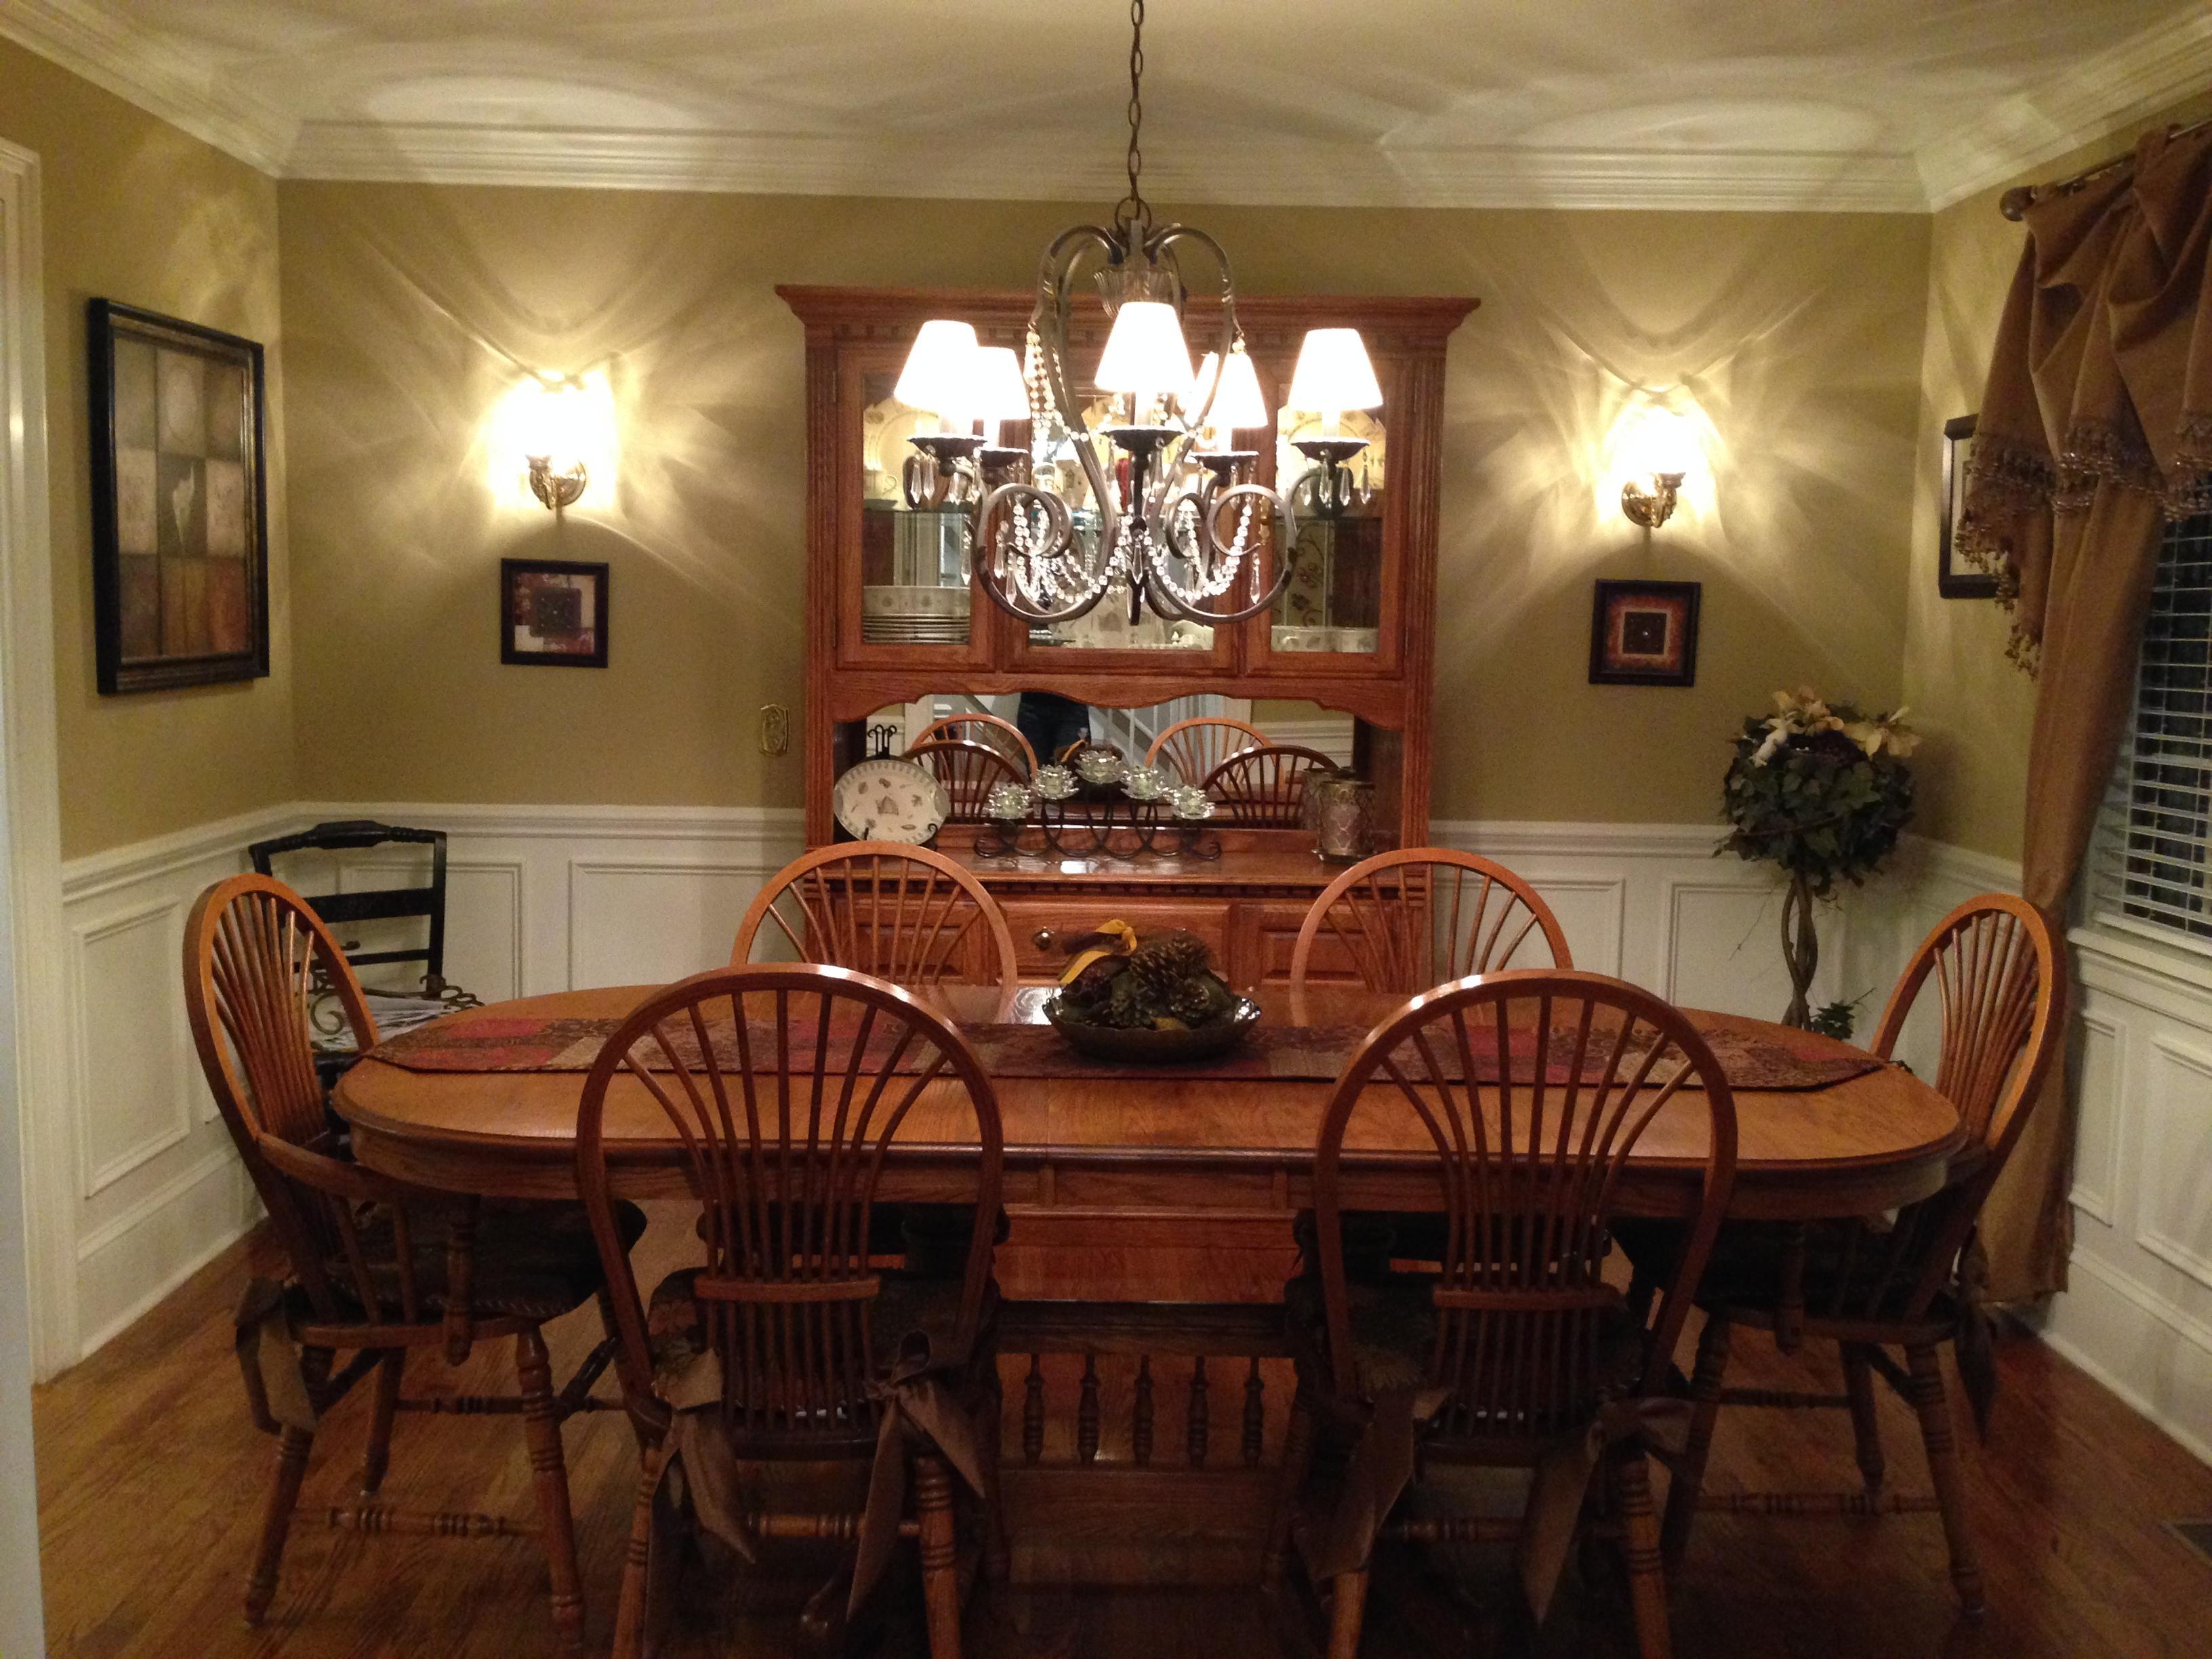 Newly remodeled dining room with chandelier and wall sconces